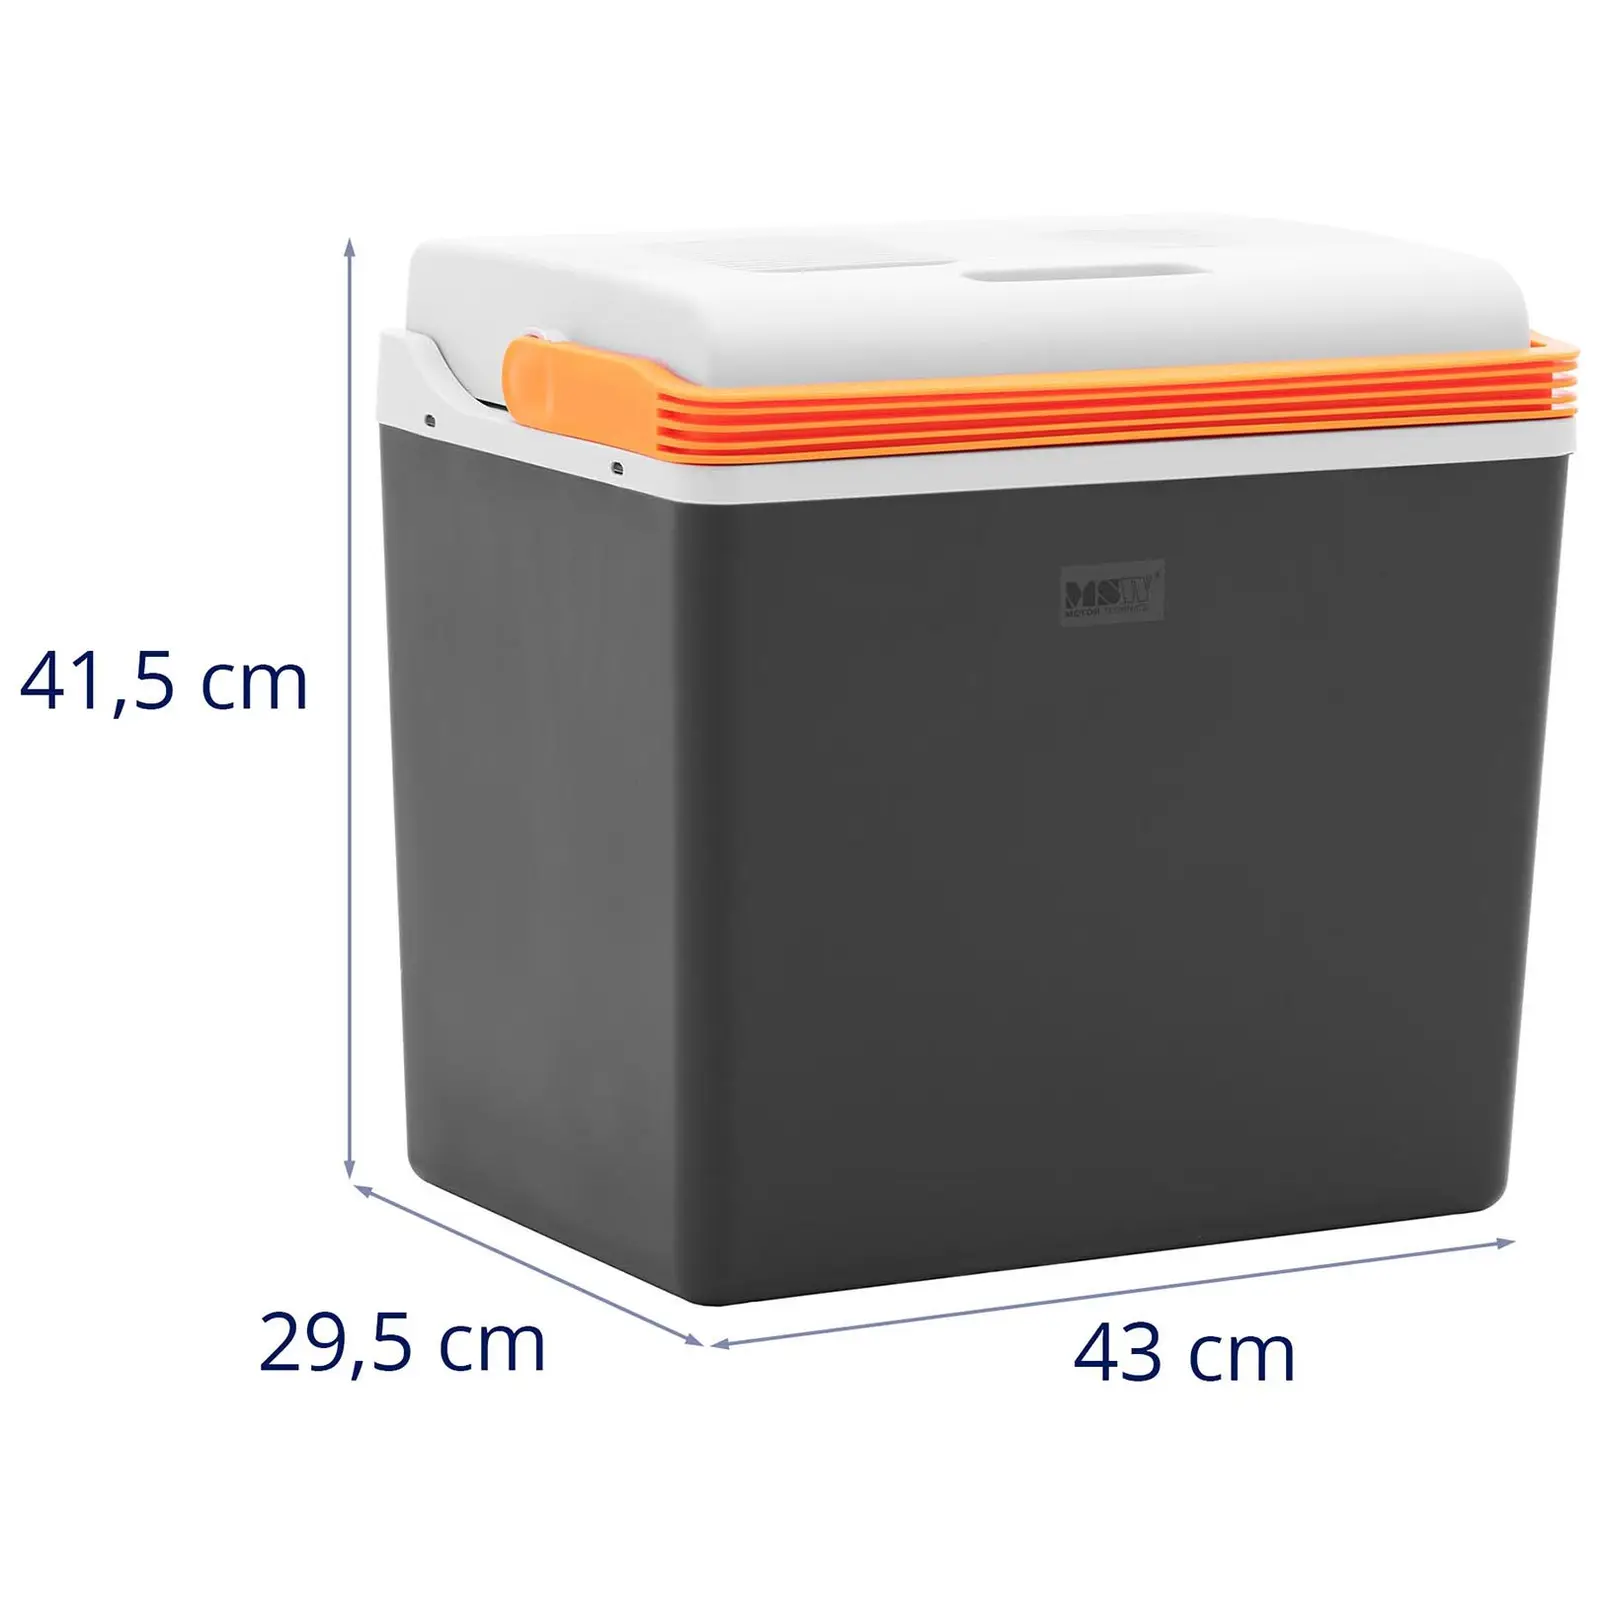 Electric Cooler 12 V / 230 V - 2-in-1 appliance with keep-warm function - 30 L